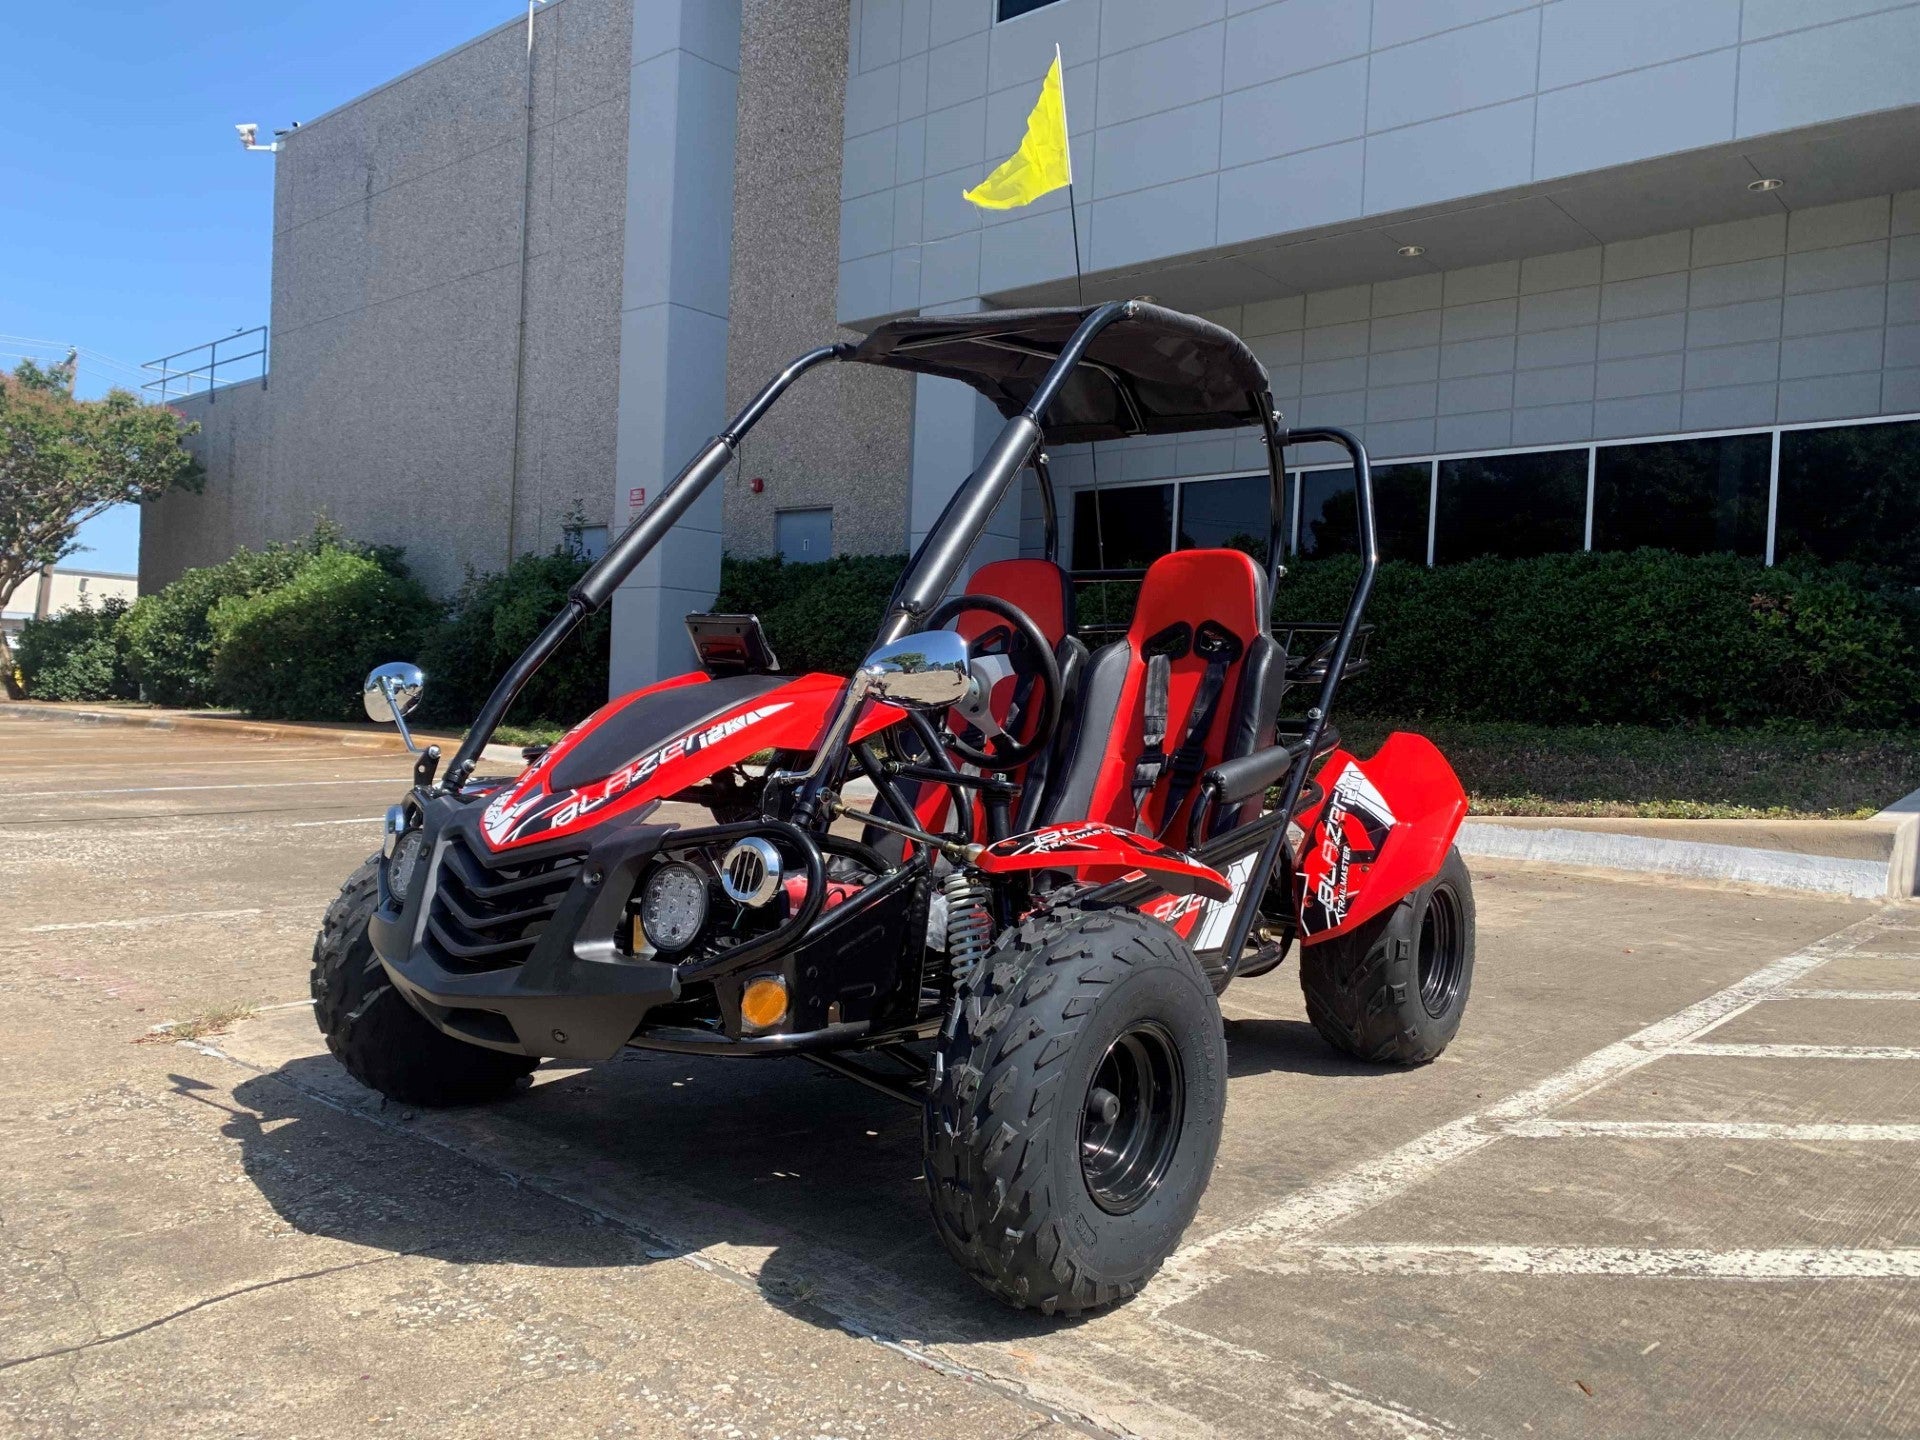 Trailmaster Blazer i2k, Electric off road go kart for teens and adults, 60 volt 30ah Lithium batteries , Dual A arm suspension, - Motobuys